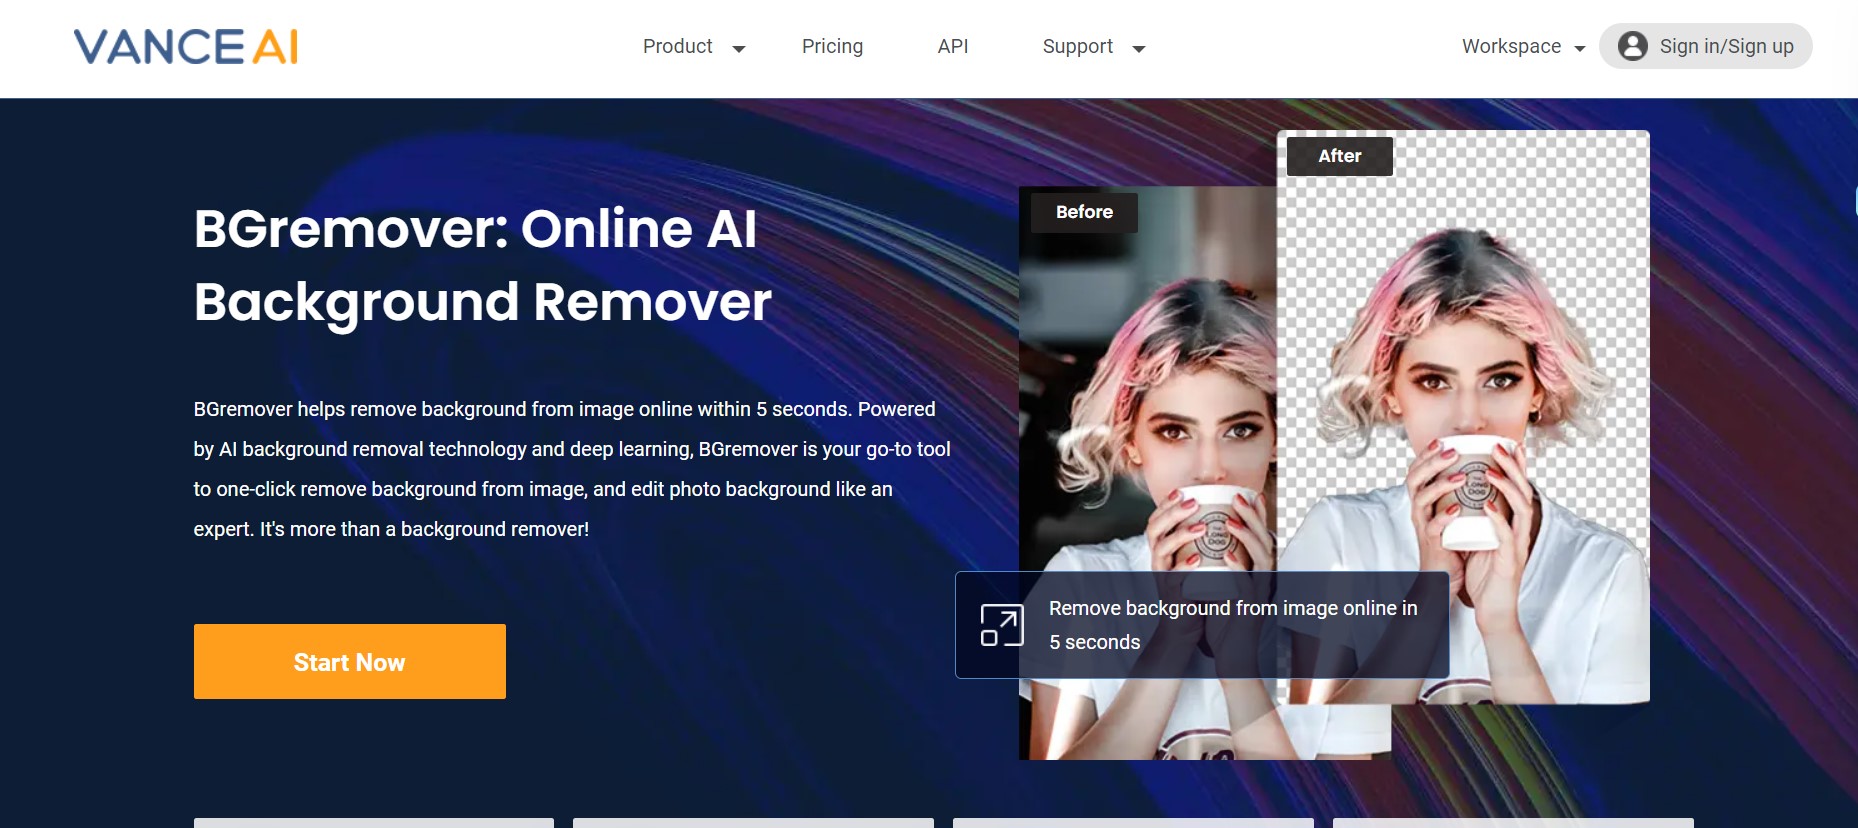 BG Remover is AI-Driven Background Remover Tool